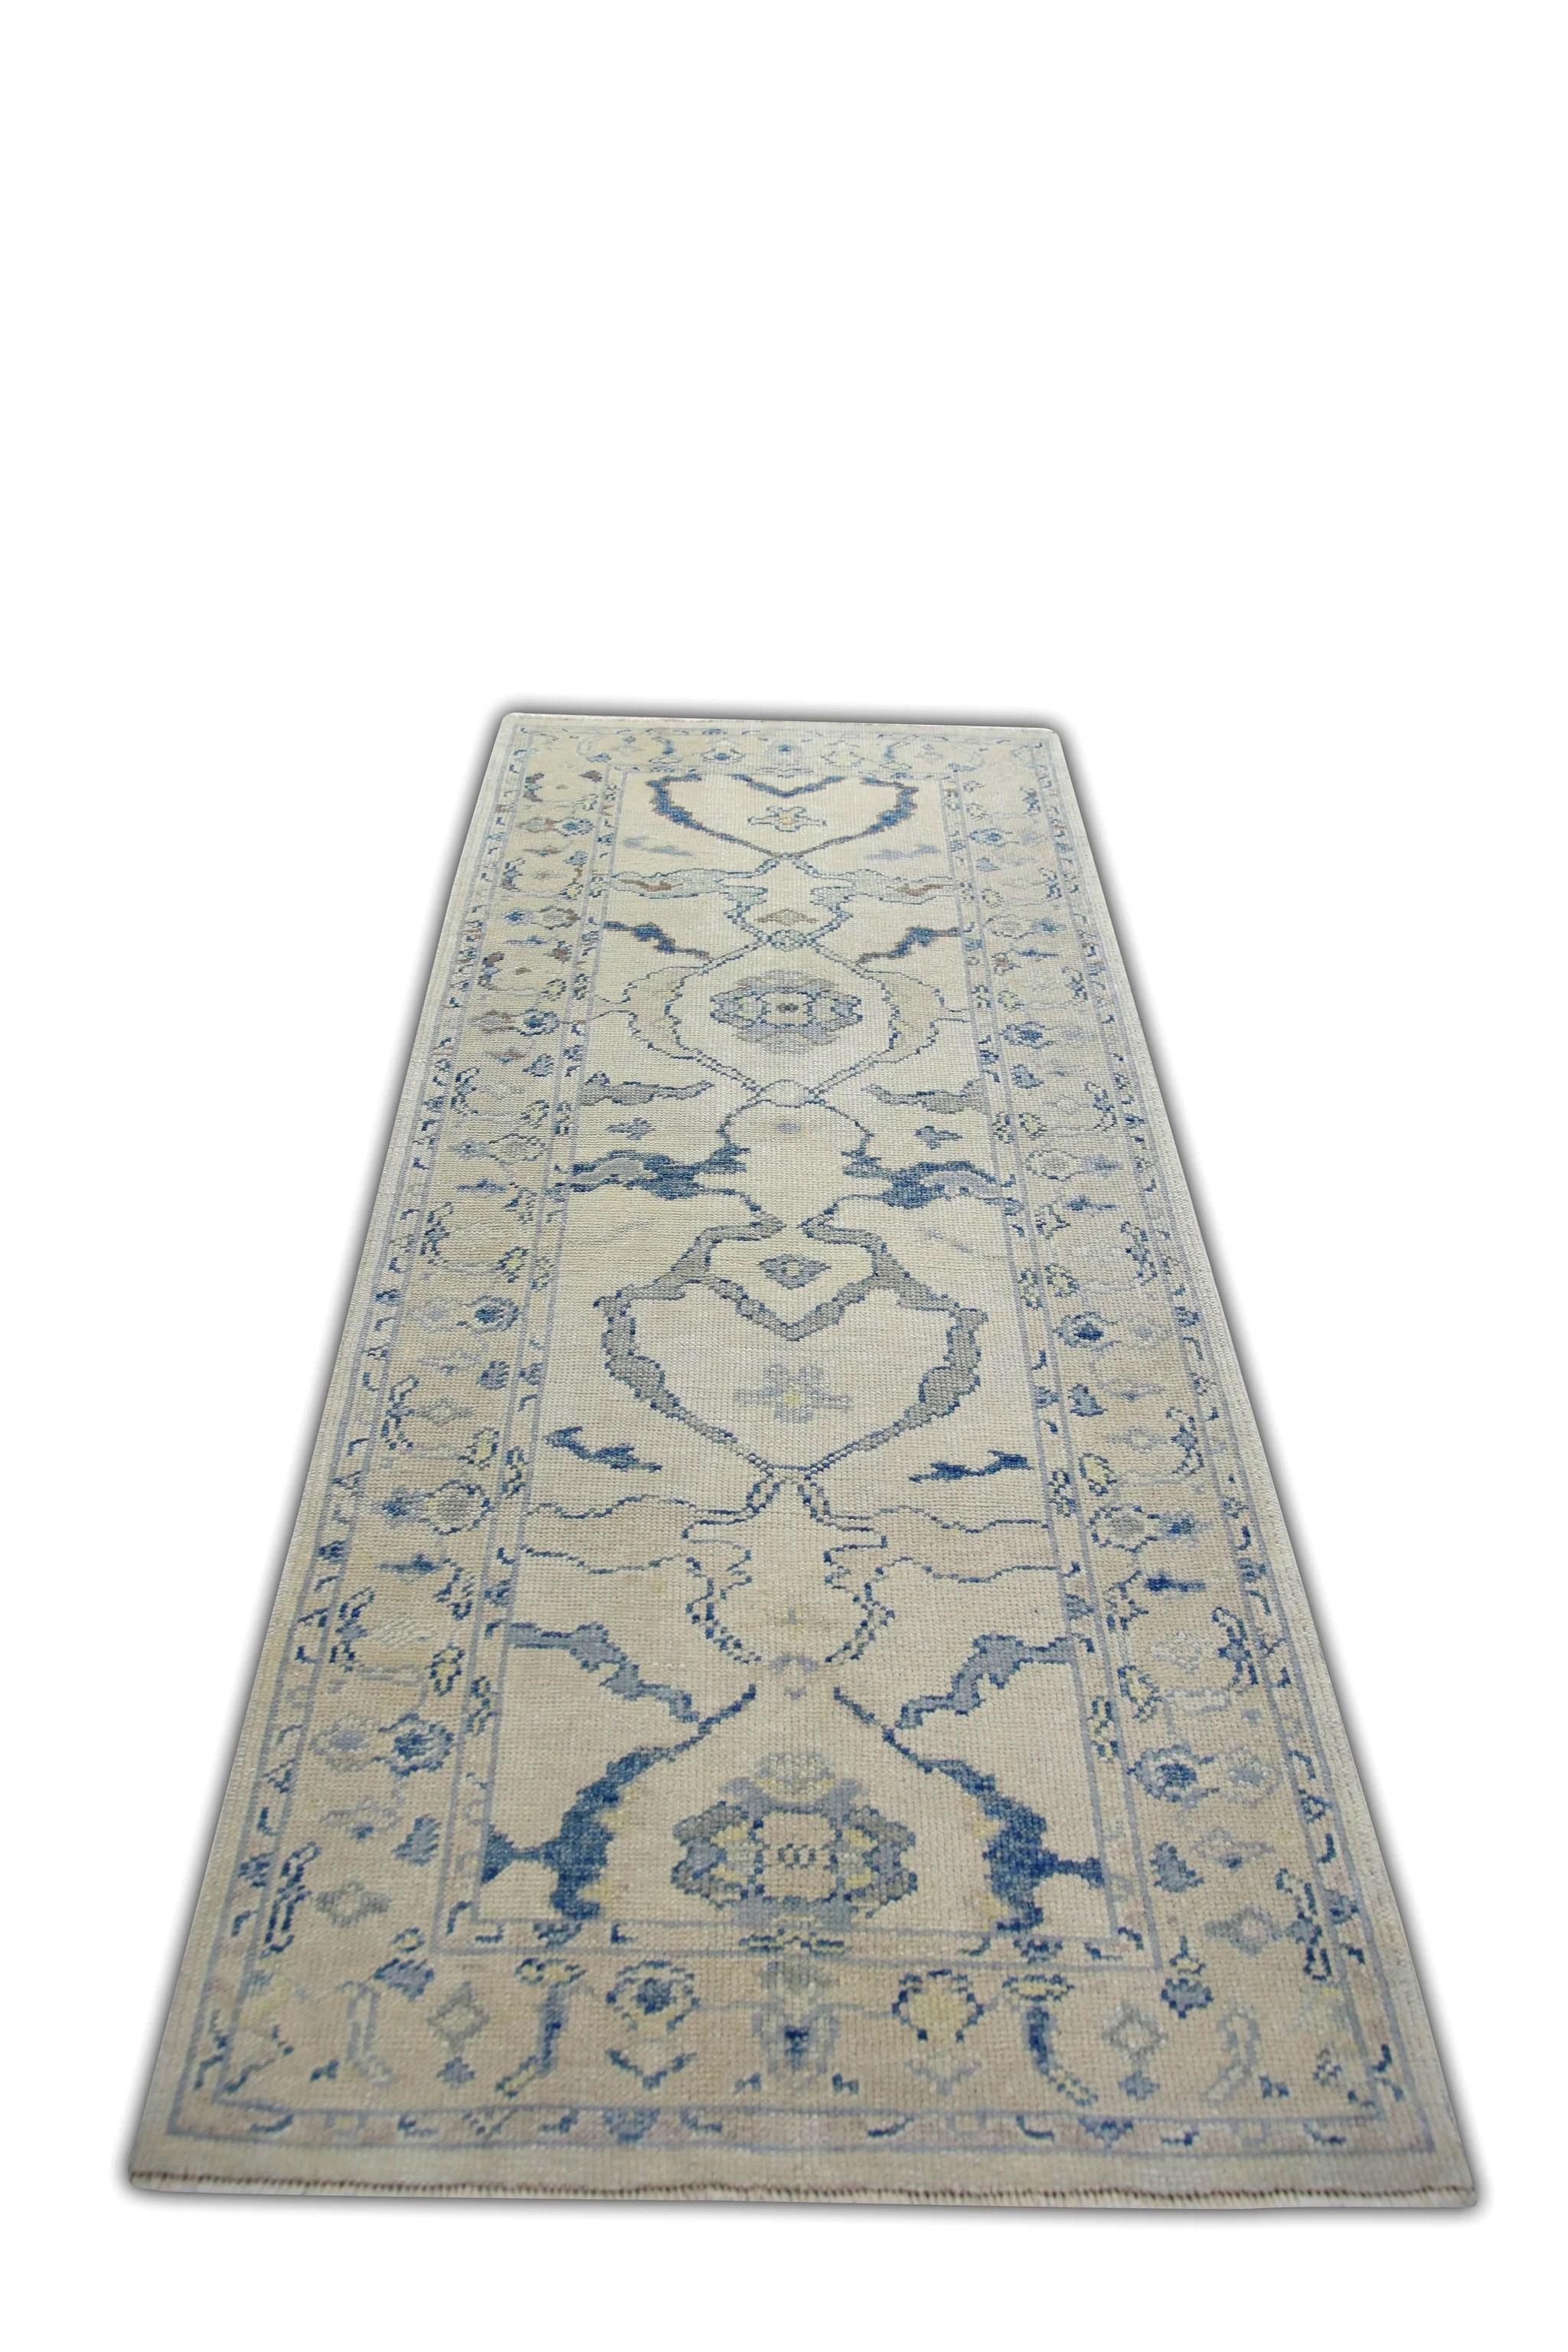 Cream and Blue Floral Handwoven Wool Turkish Oushak Rug 3'1